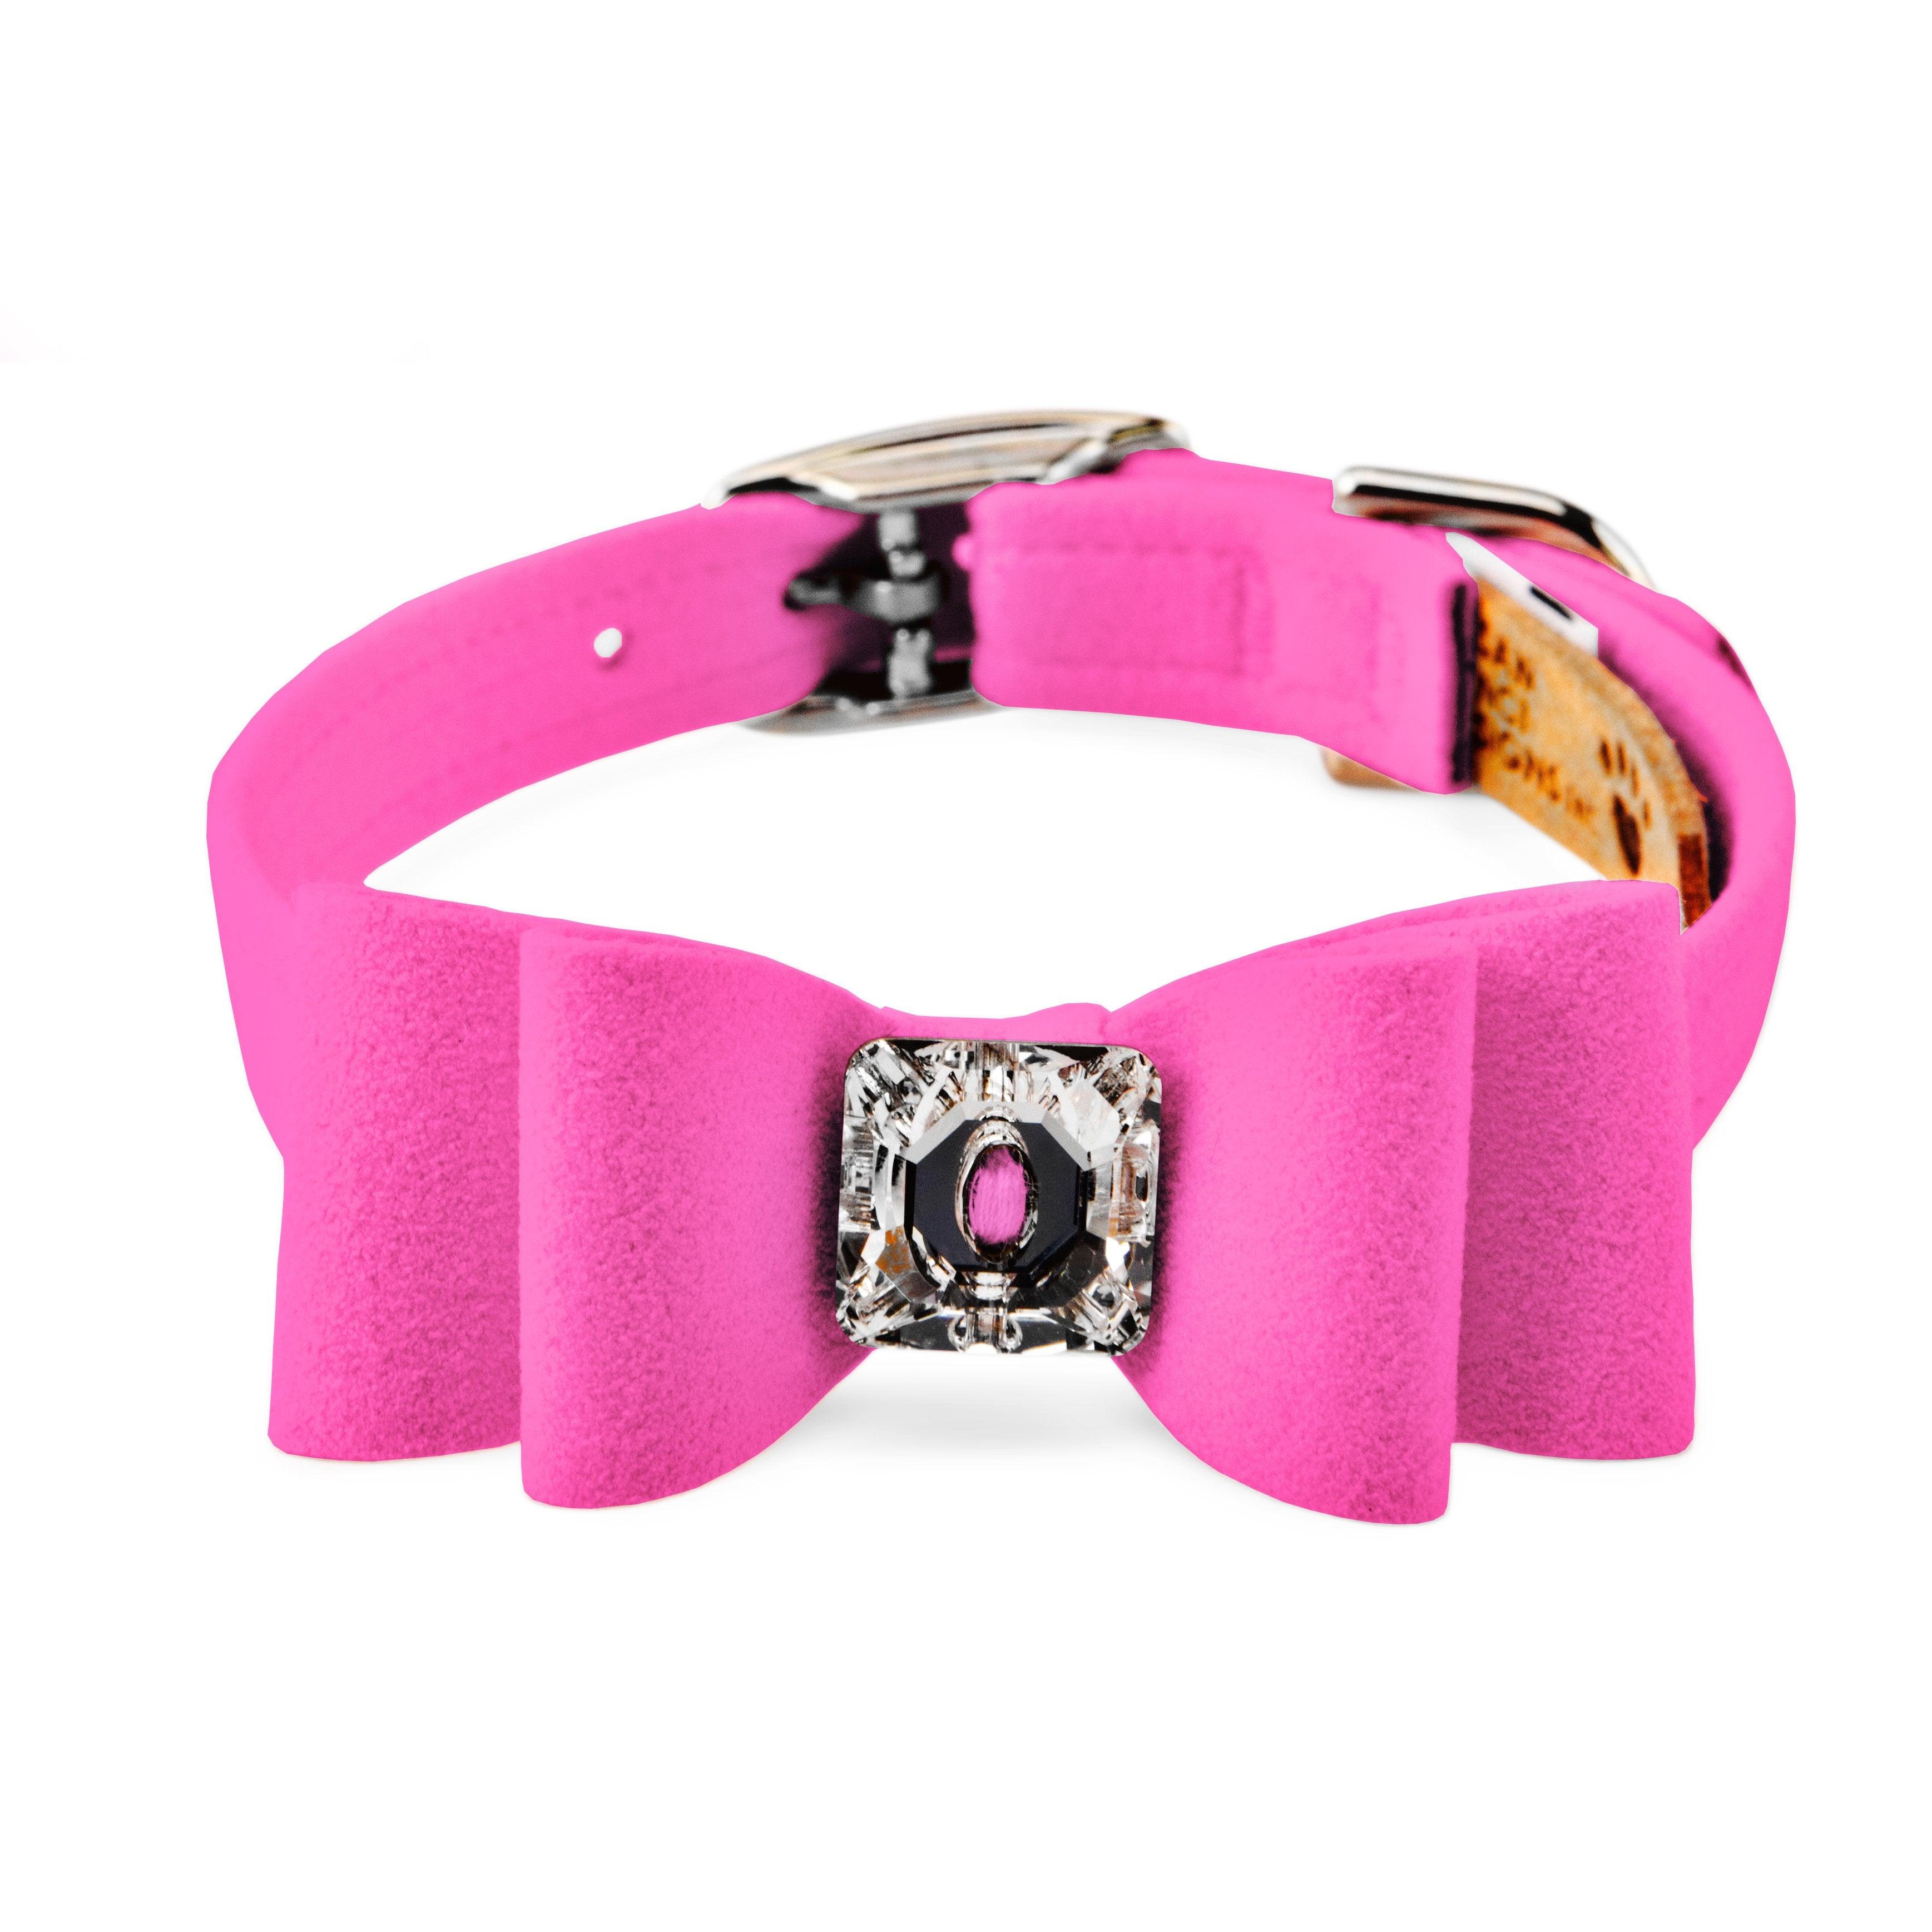 Big Bow Collar - Rocky & Maggie's Pet Boutique and Salon